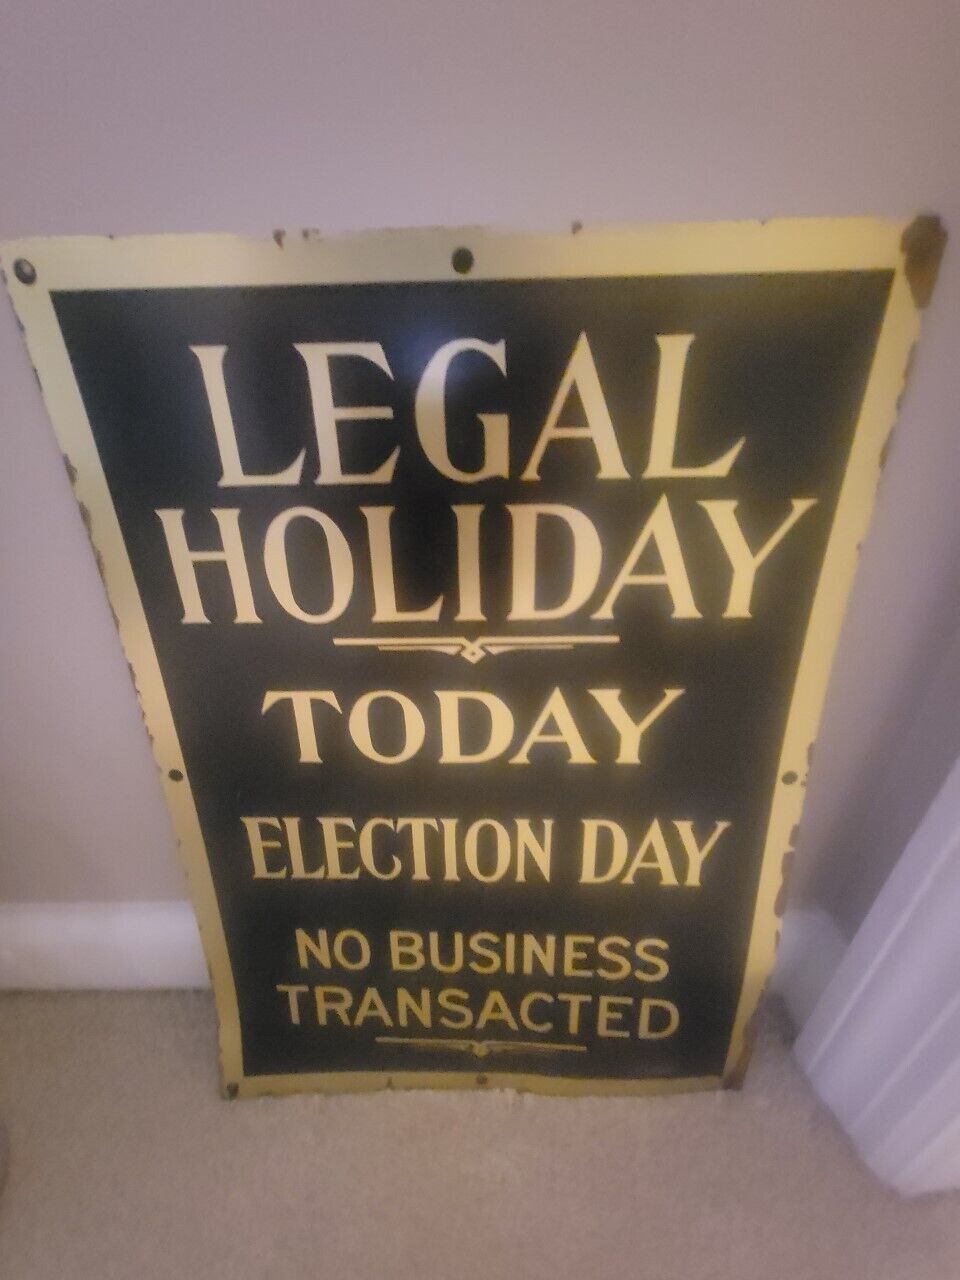 Vintage Legal Holiday Today Metal Sign 11x15